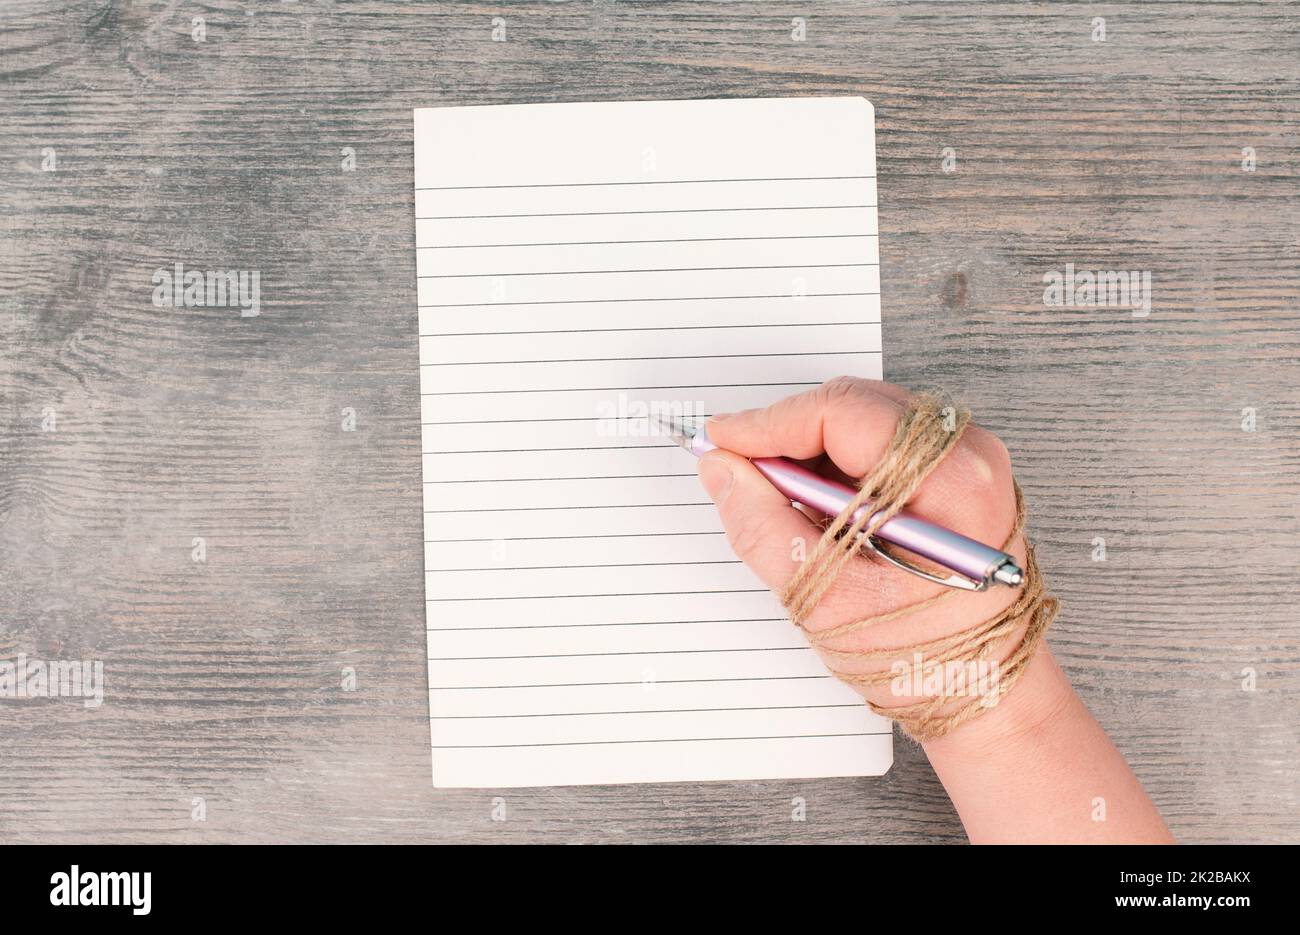 Cancel culture, chained hand with a pen, free press,freedom of speech, discrimination and censorship, new normal, empty paper with copy space Stock Photo